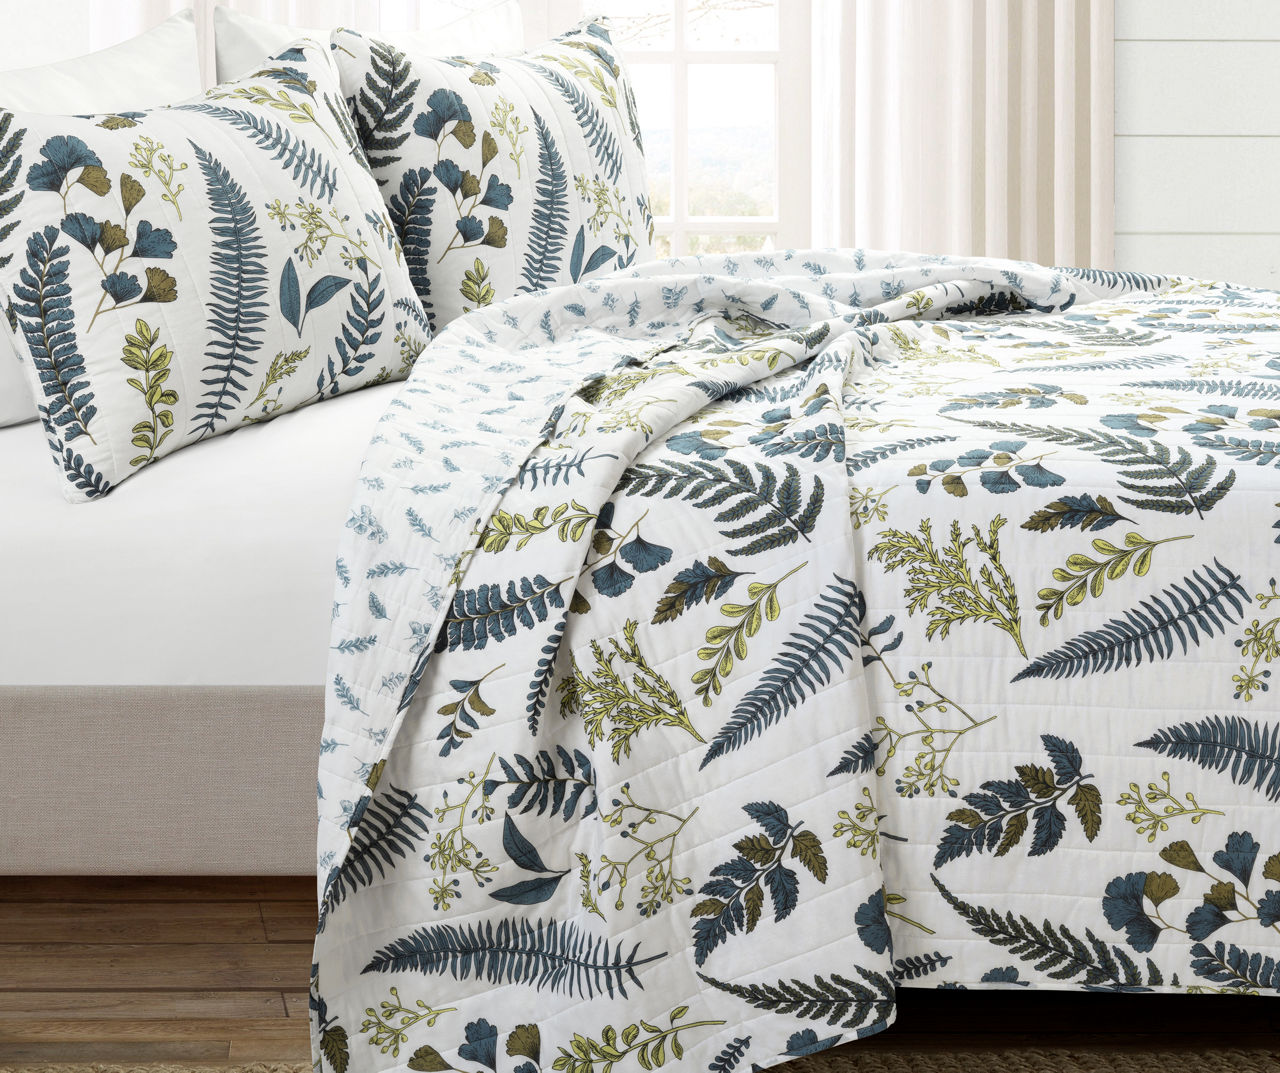 Floral Quilt King Size, Green Botanical King Quilt 3 Pieces